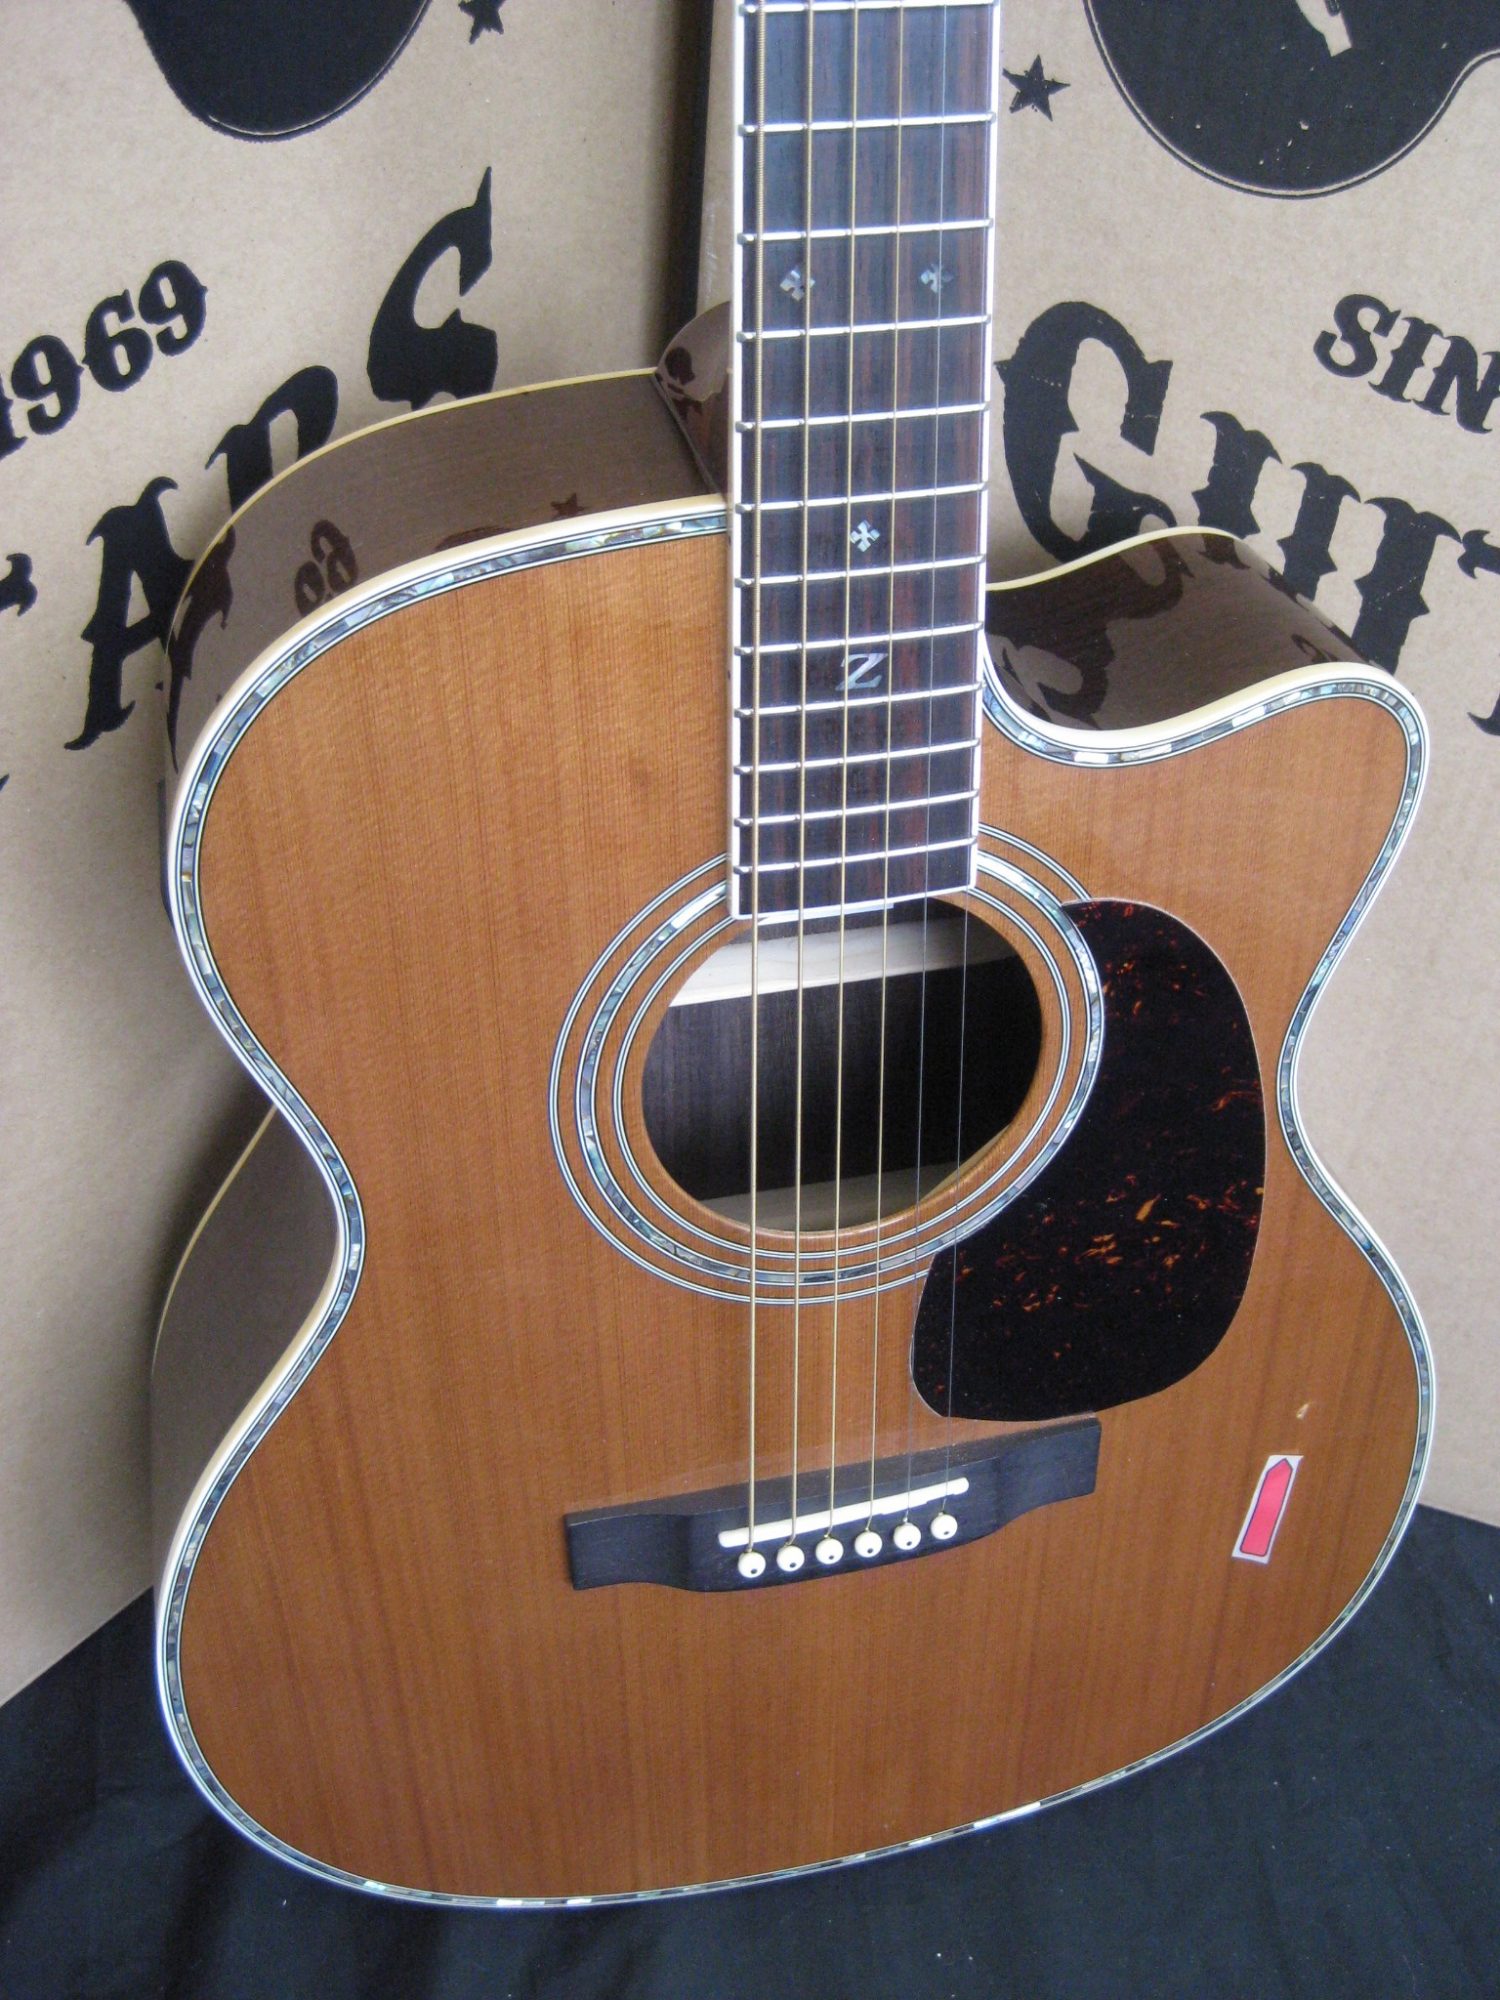 1864-80ceom-acoustic-electric-discount-guitar-zager-guitars